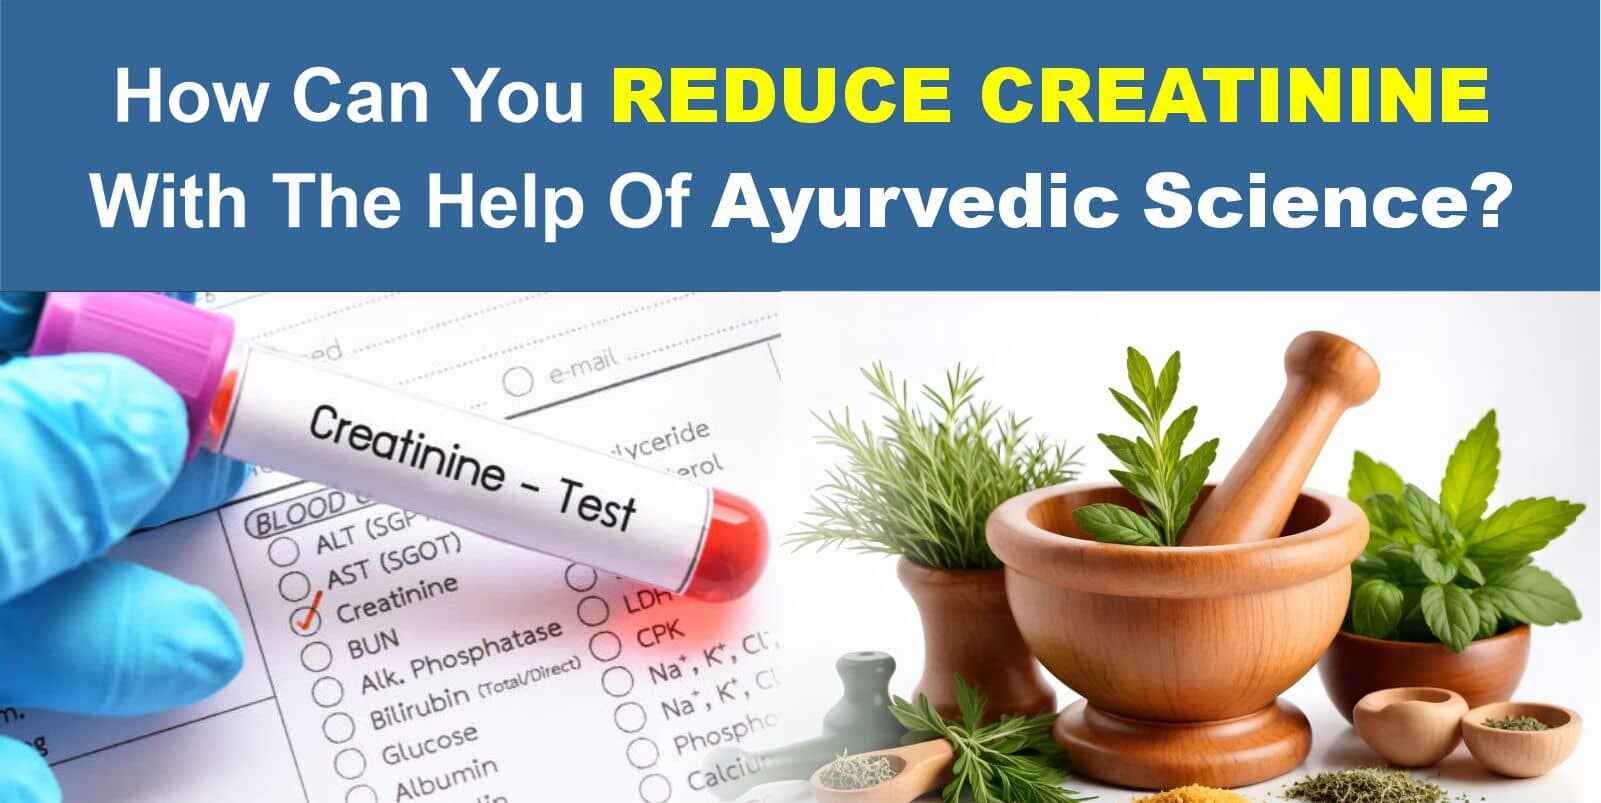 How Can You Reduce Creatinine With The Help Of Ayurvedic Science?